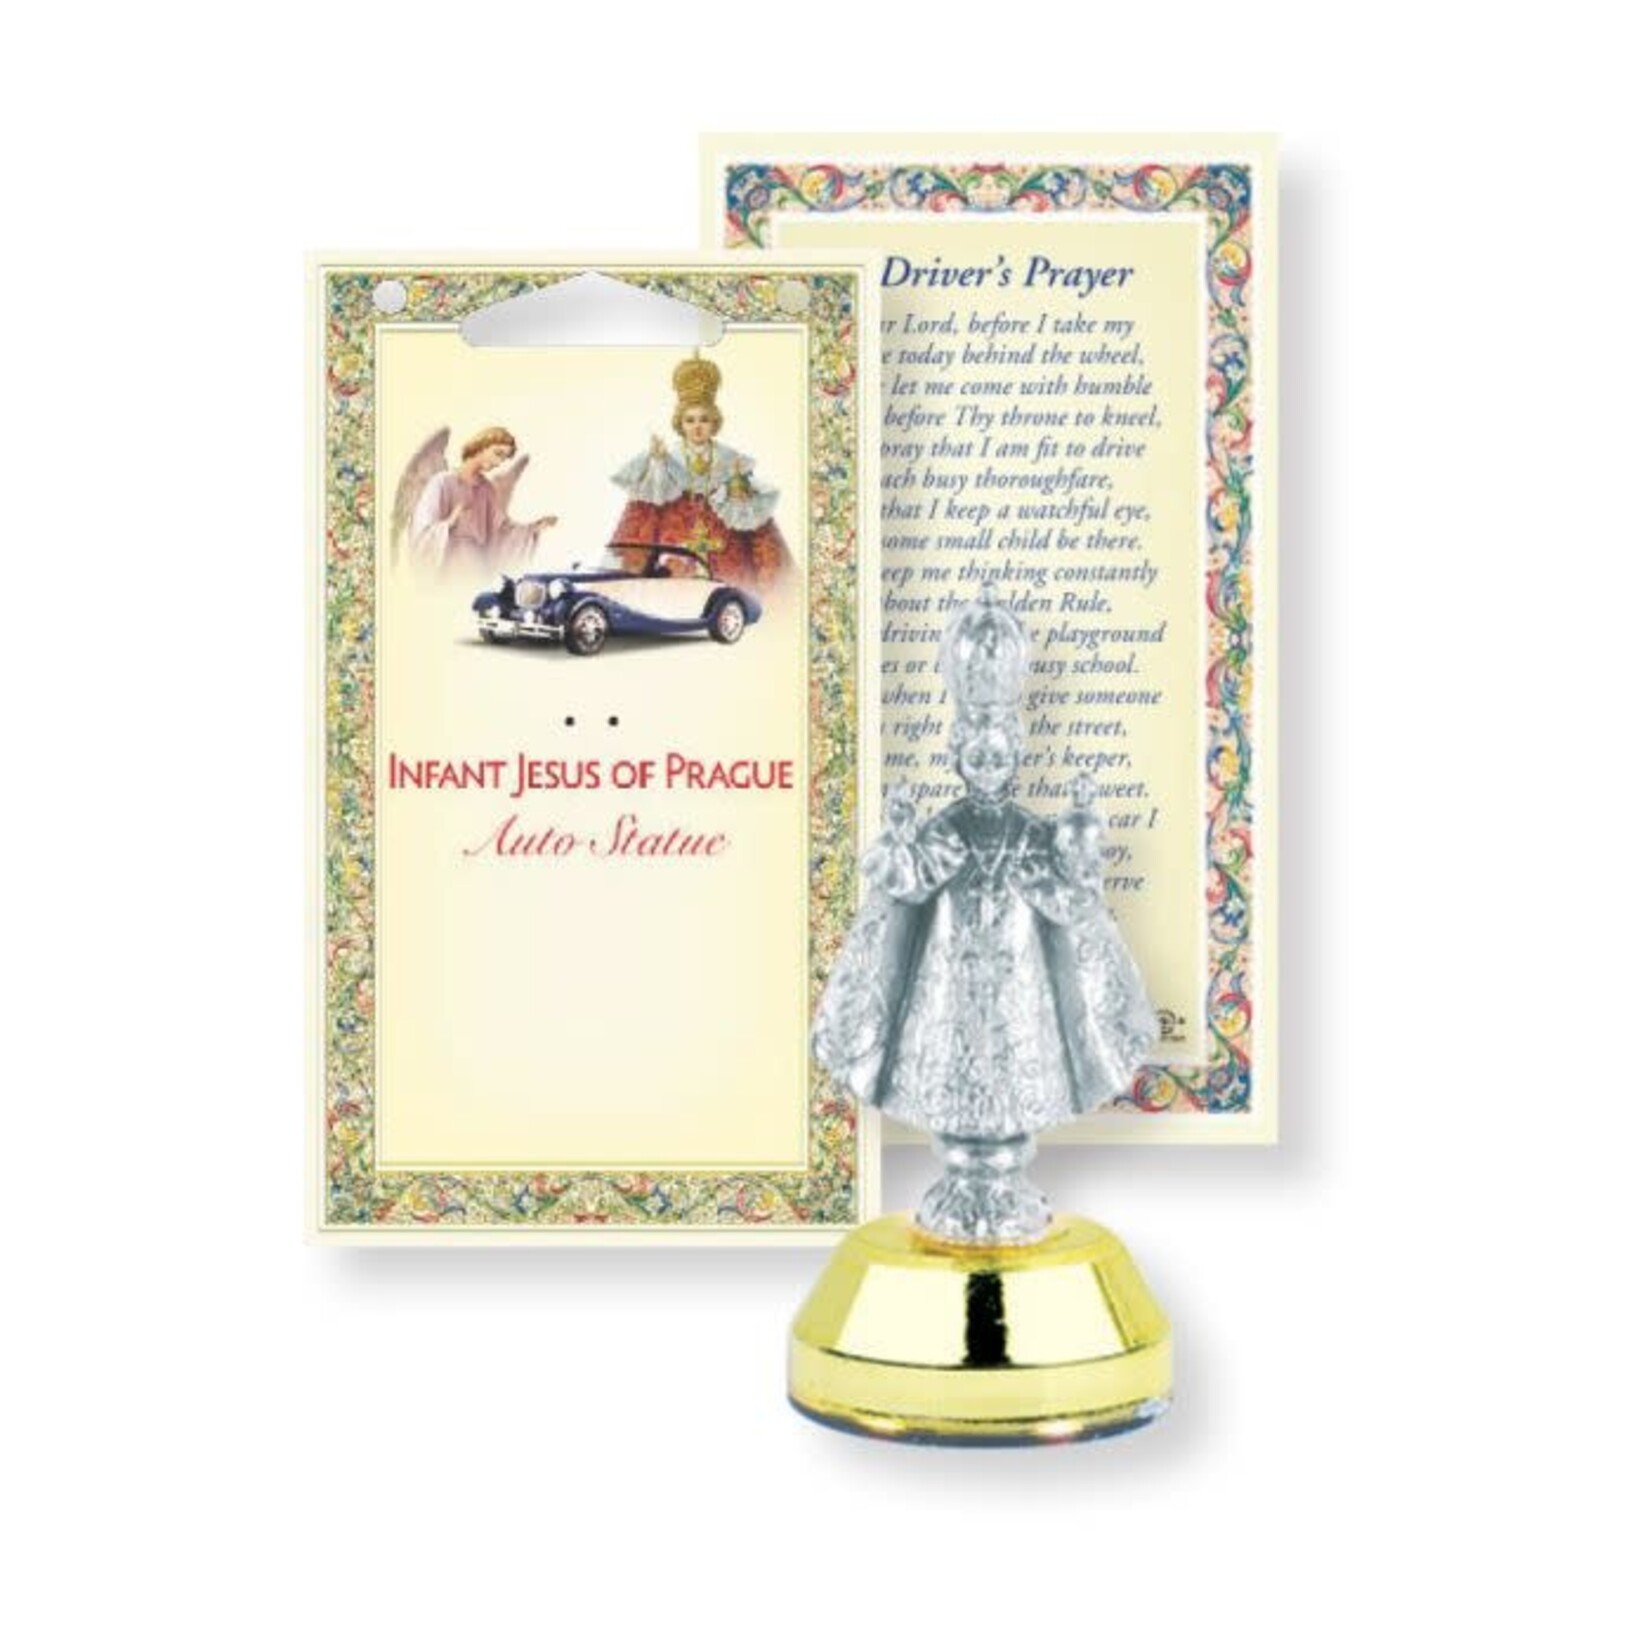 Infant of Prague Auto Statuette with Driver's Prayer